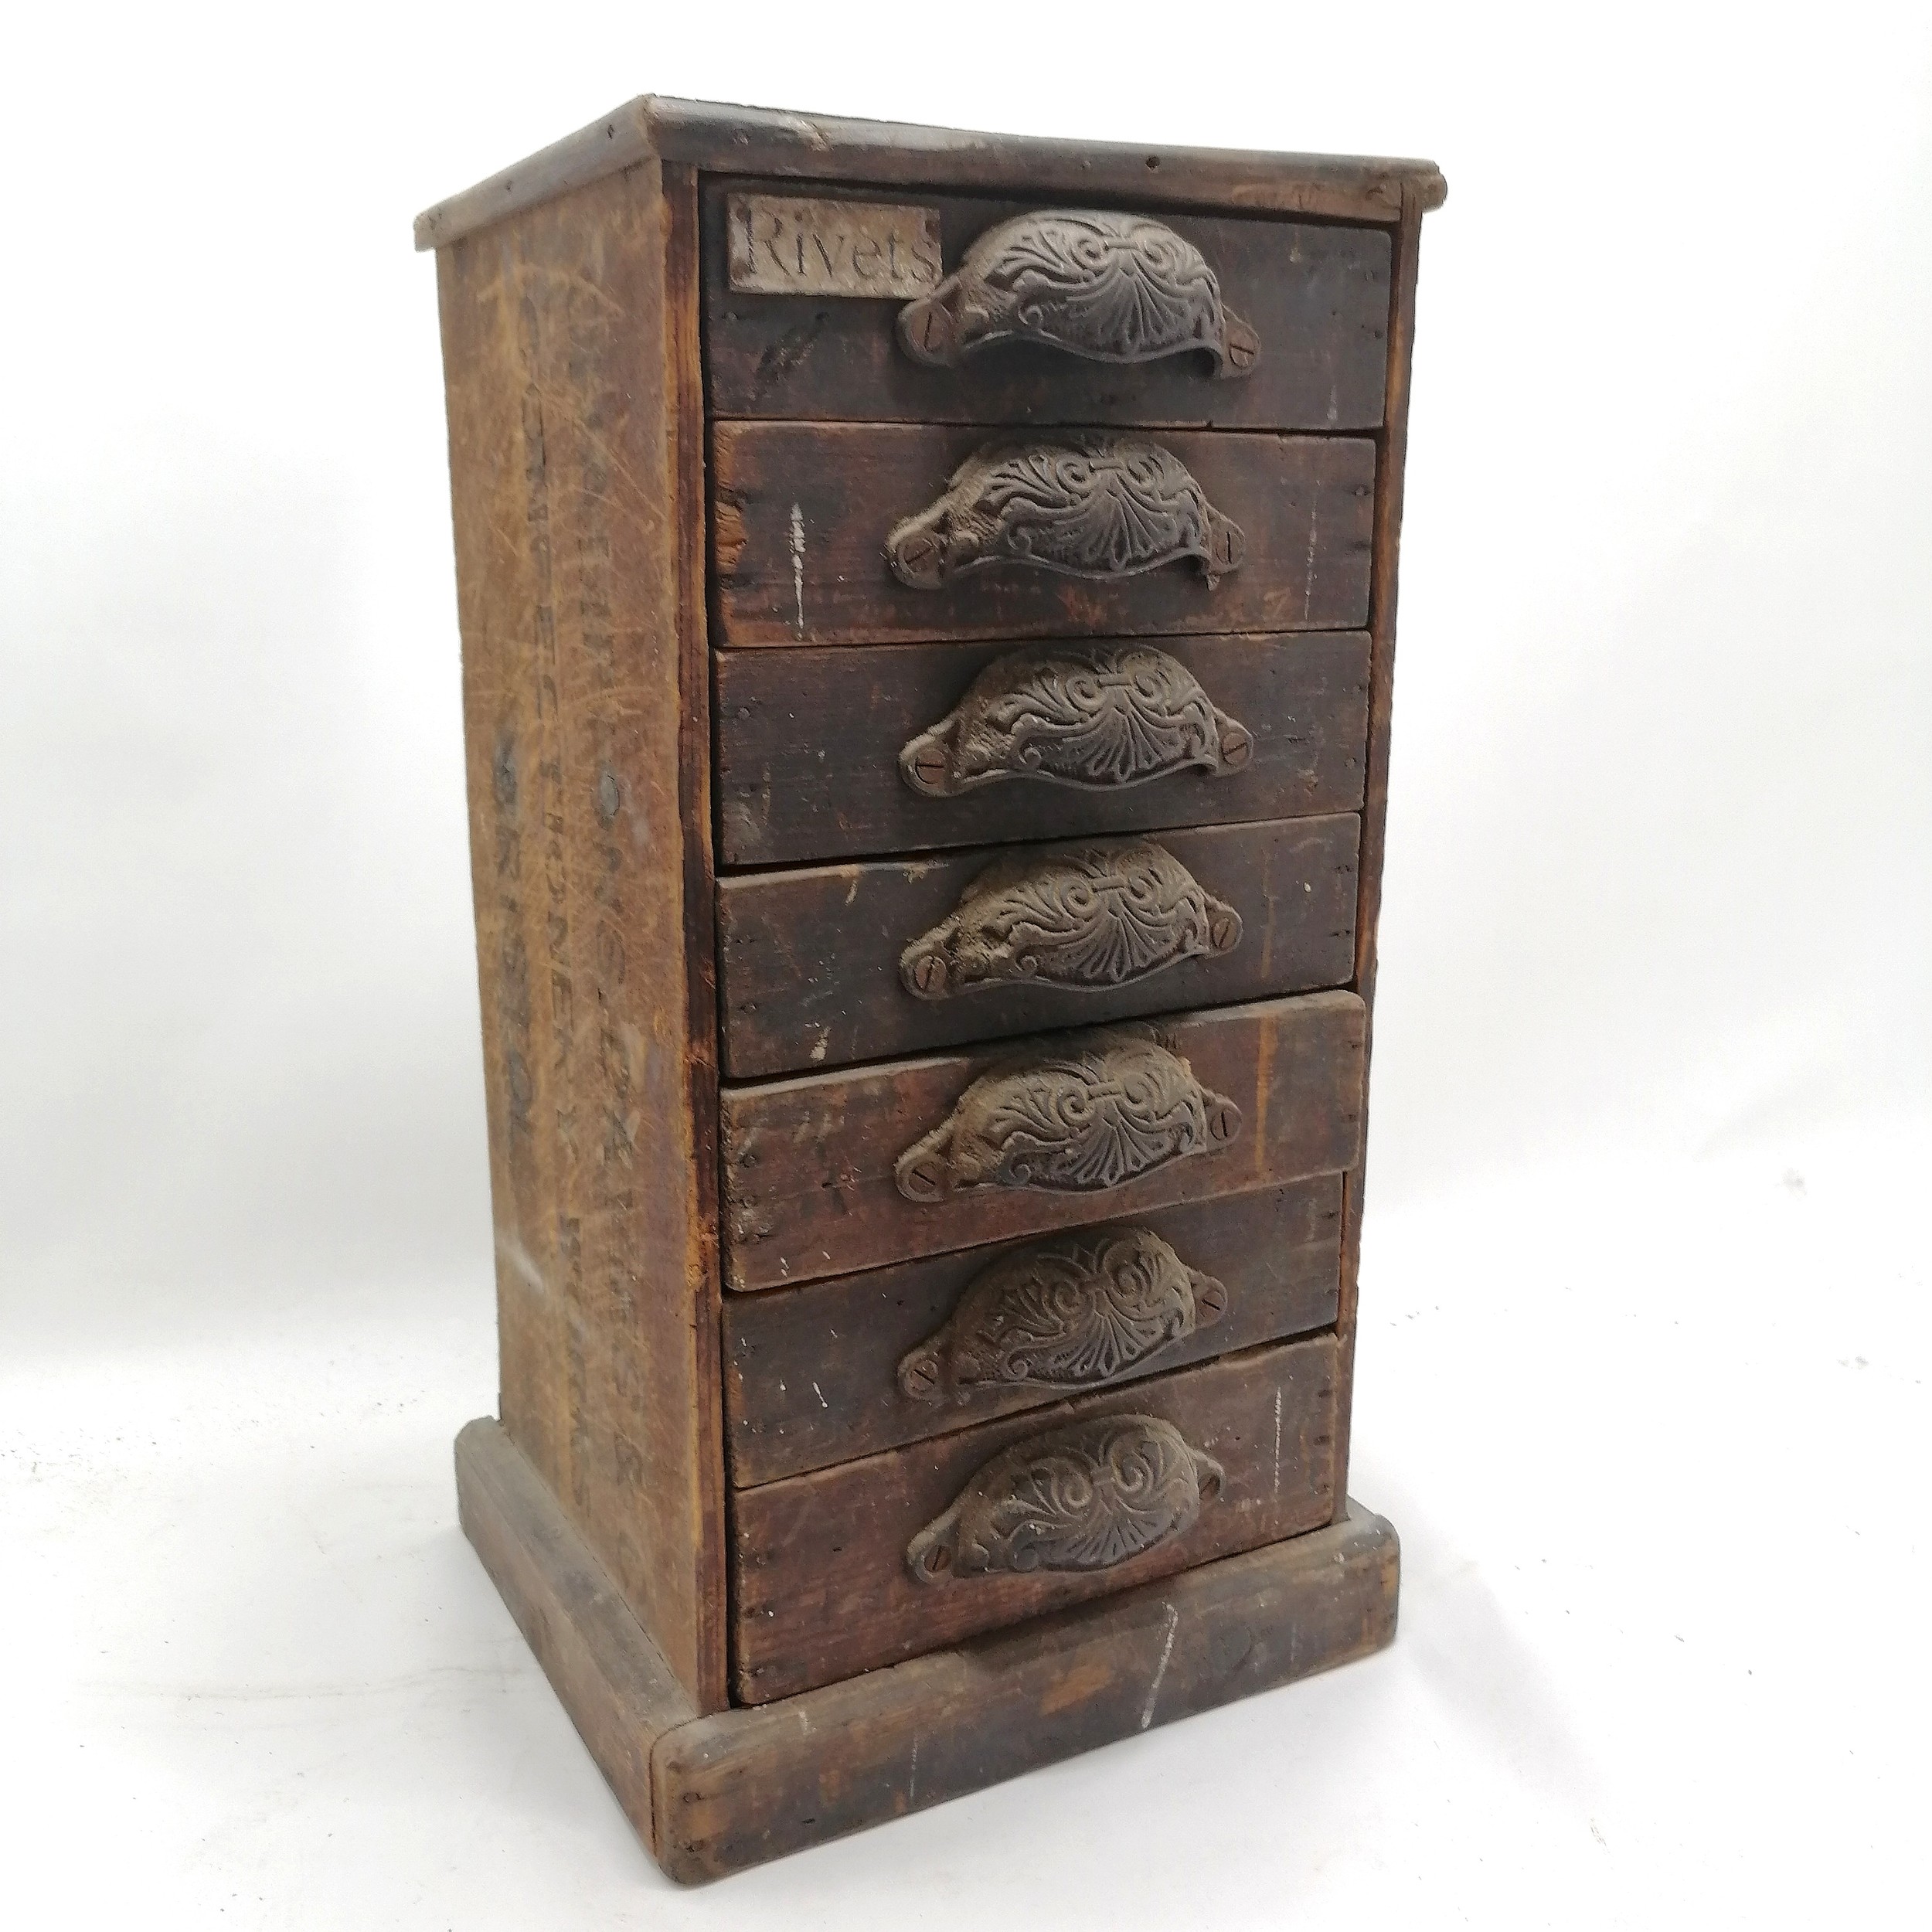 Antique pine flight of 7 collectors drawers made from an old crate 44cm high x 25cm x 22cm deep